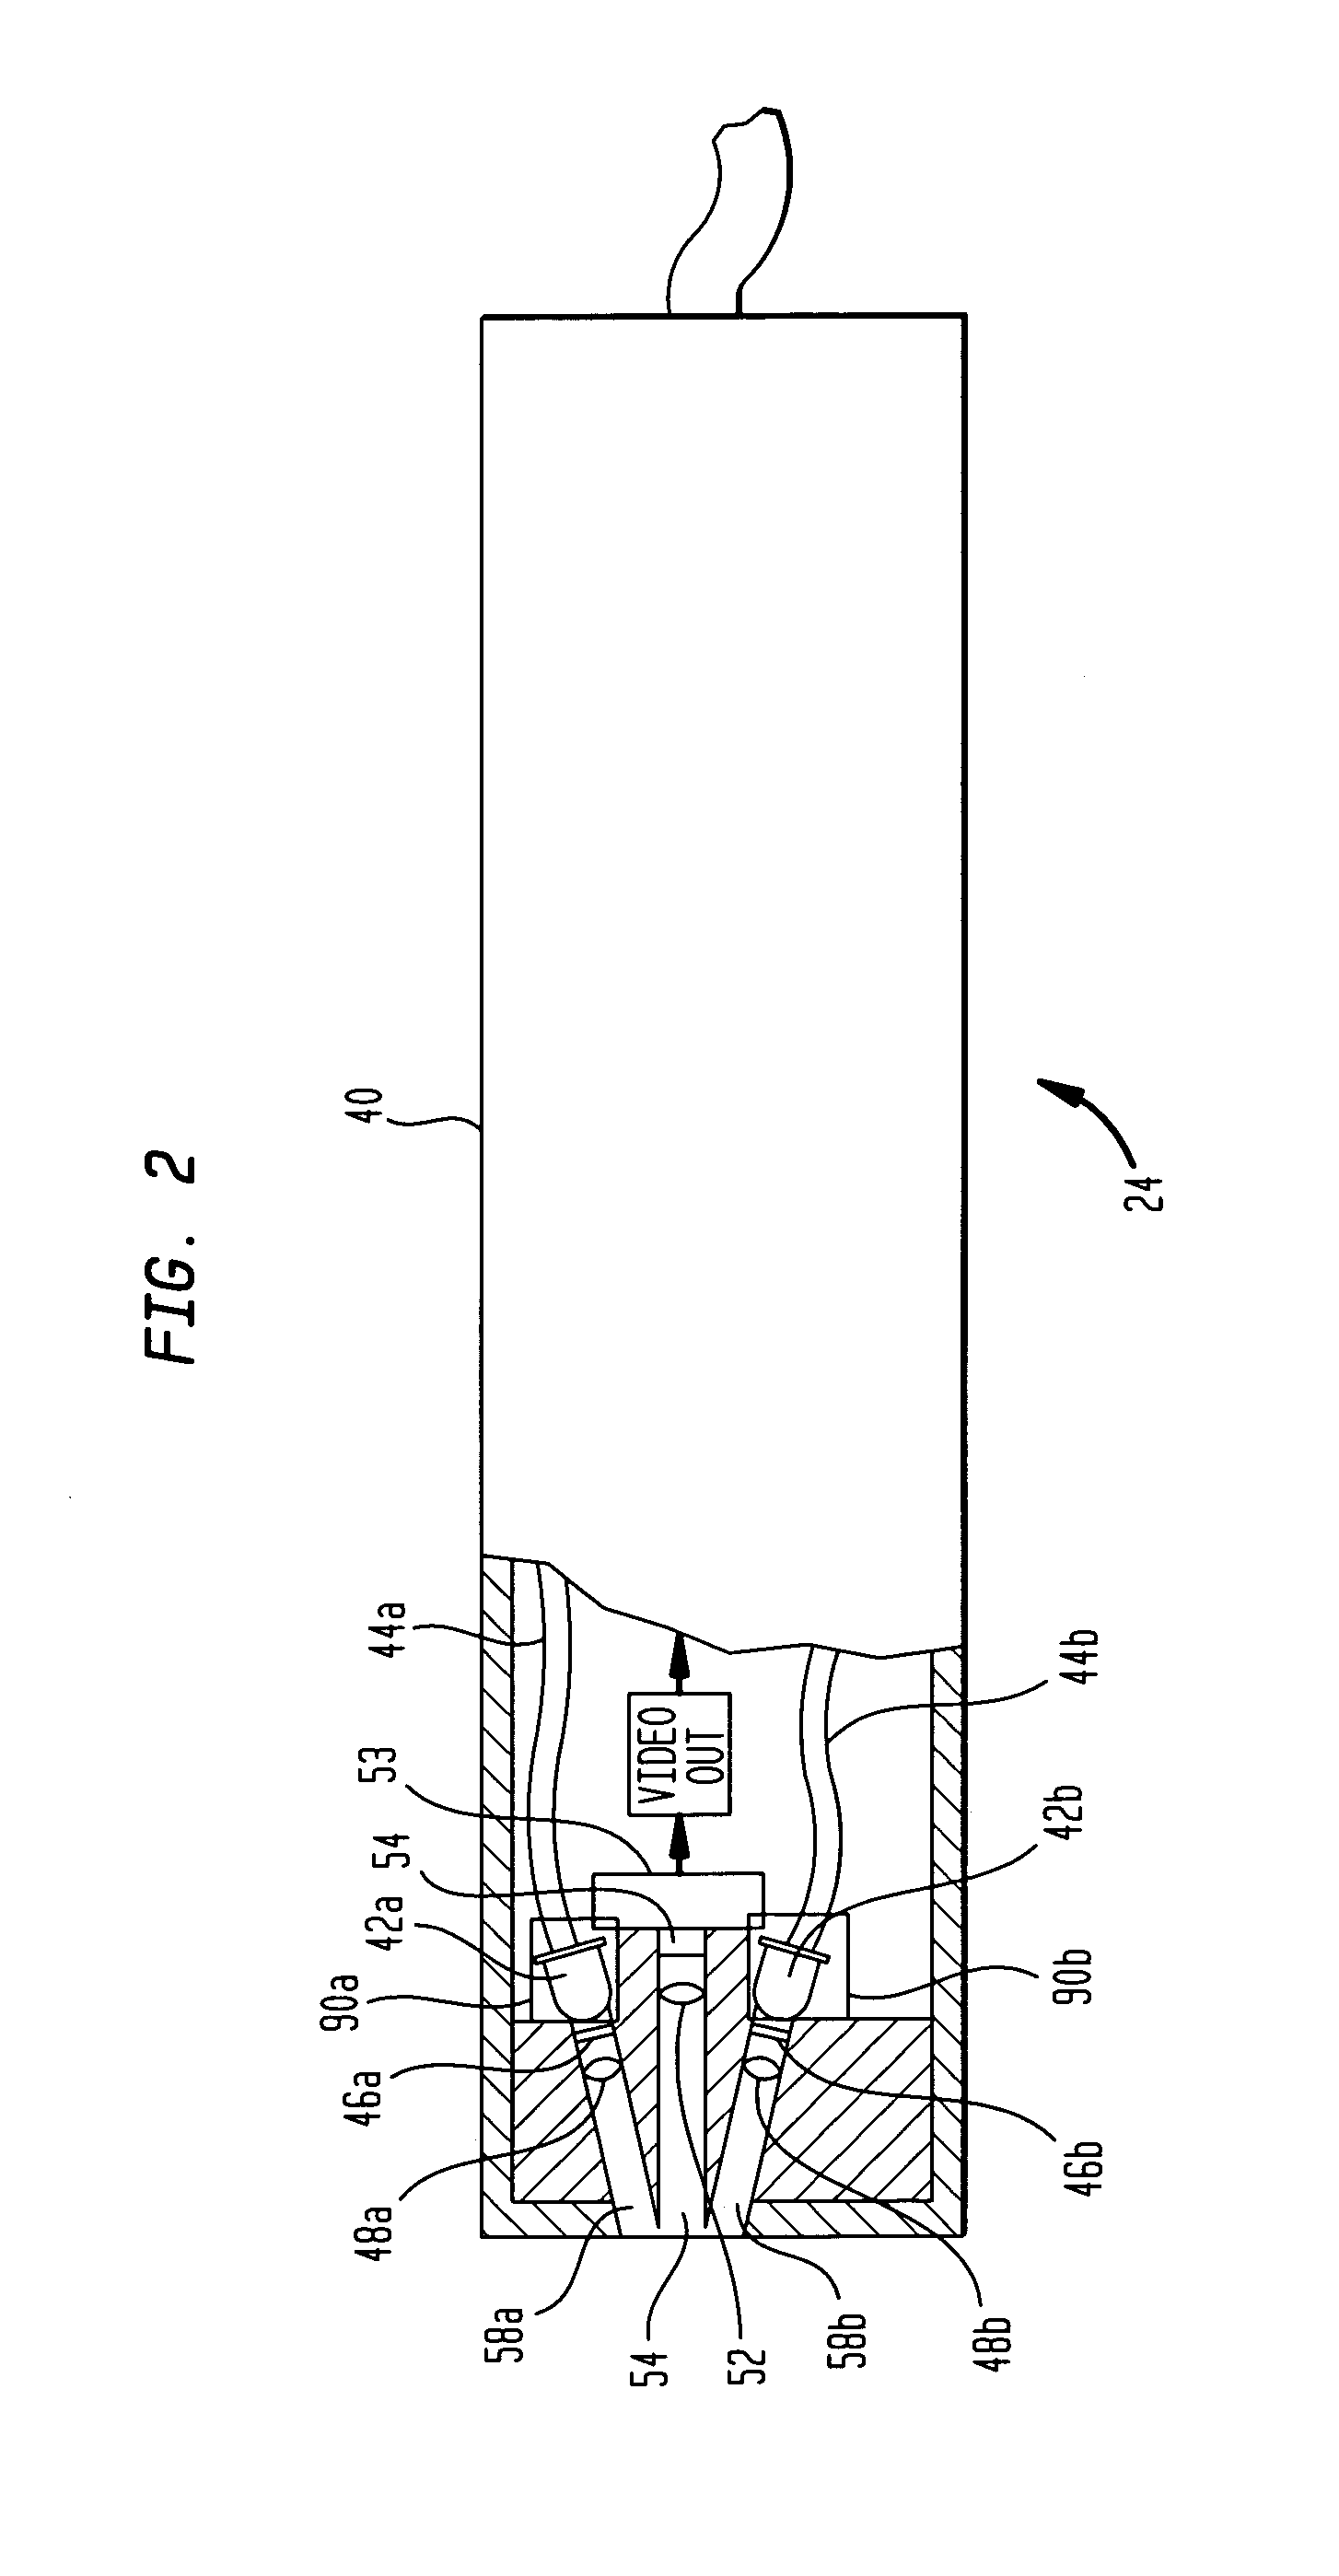 Portable authentication device and method of authenticating products or product packaging